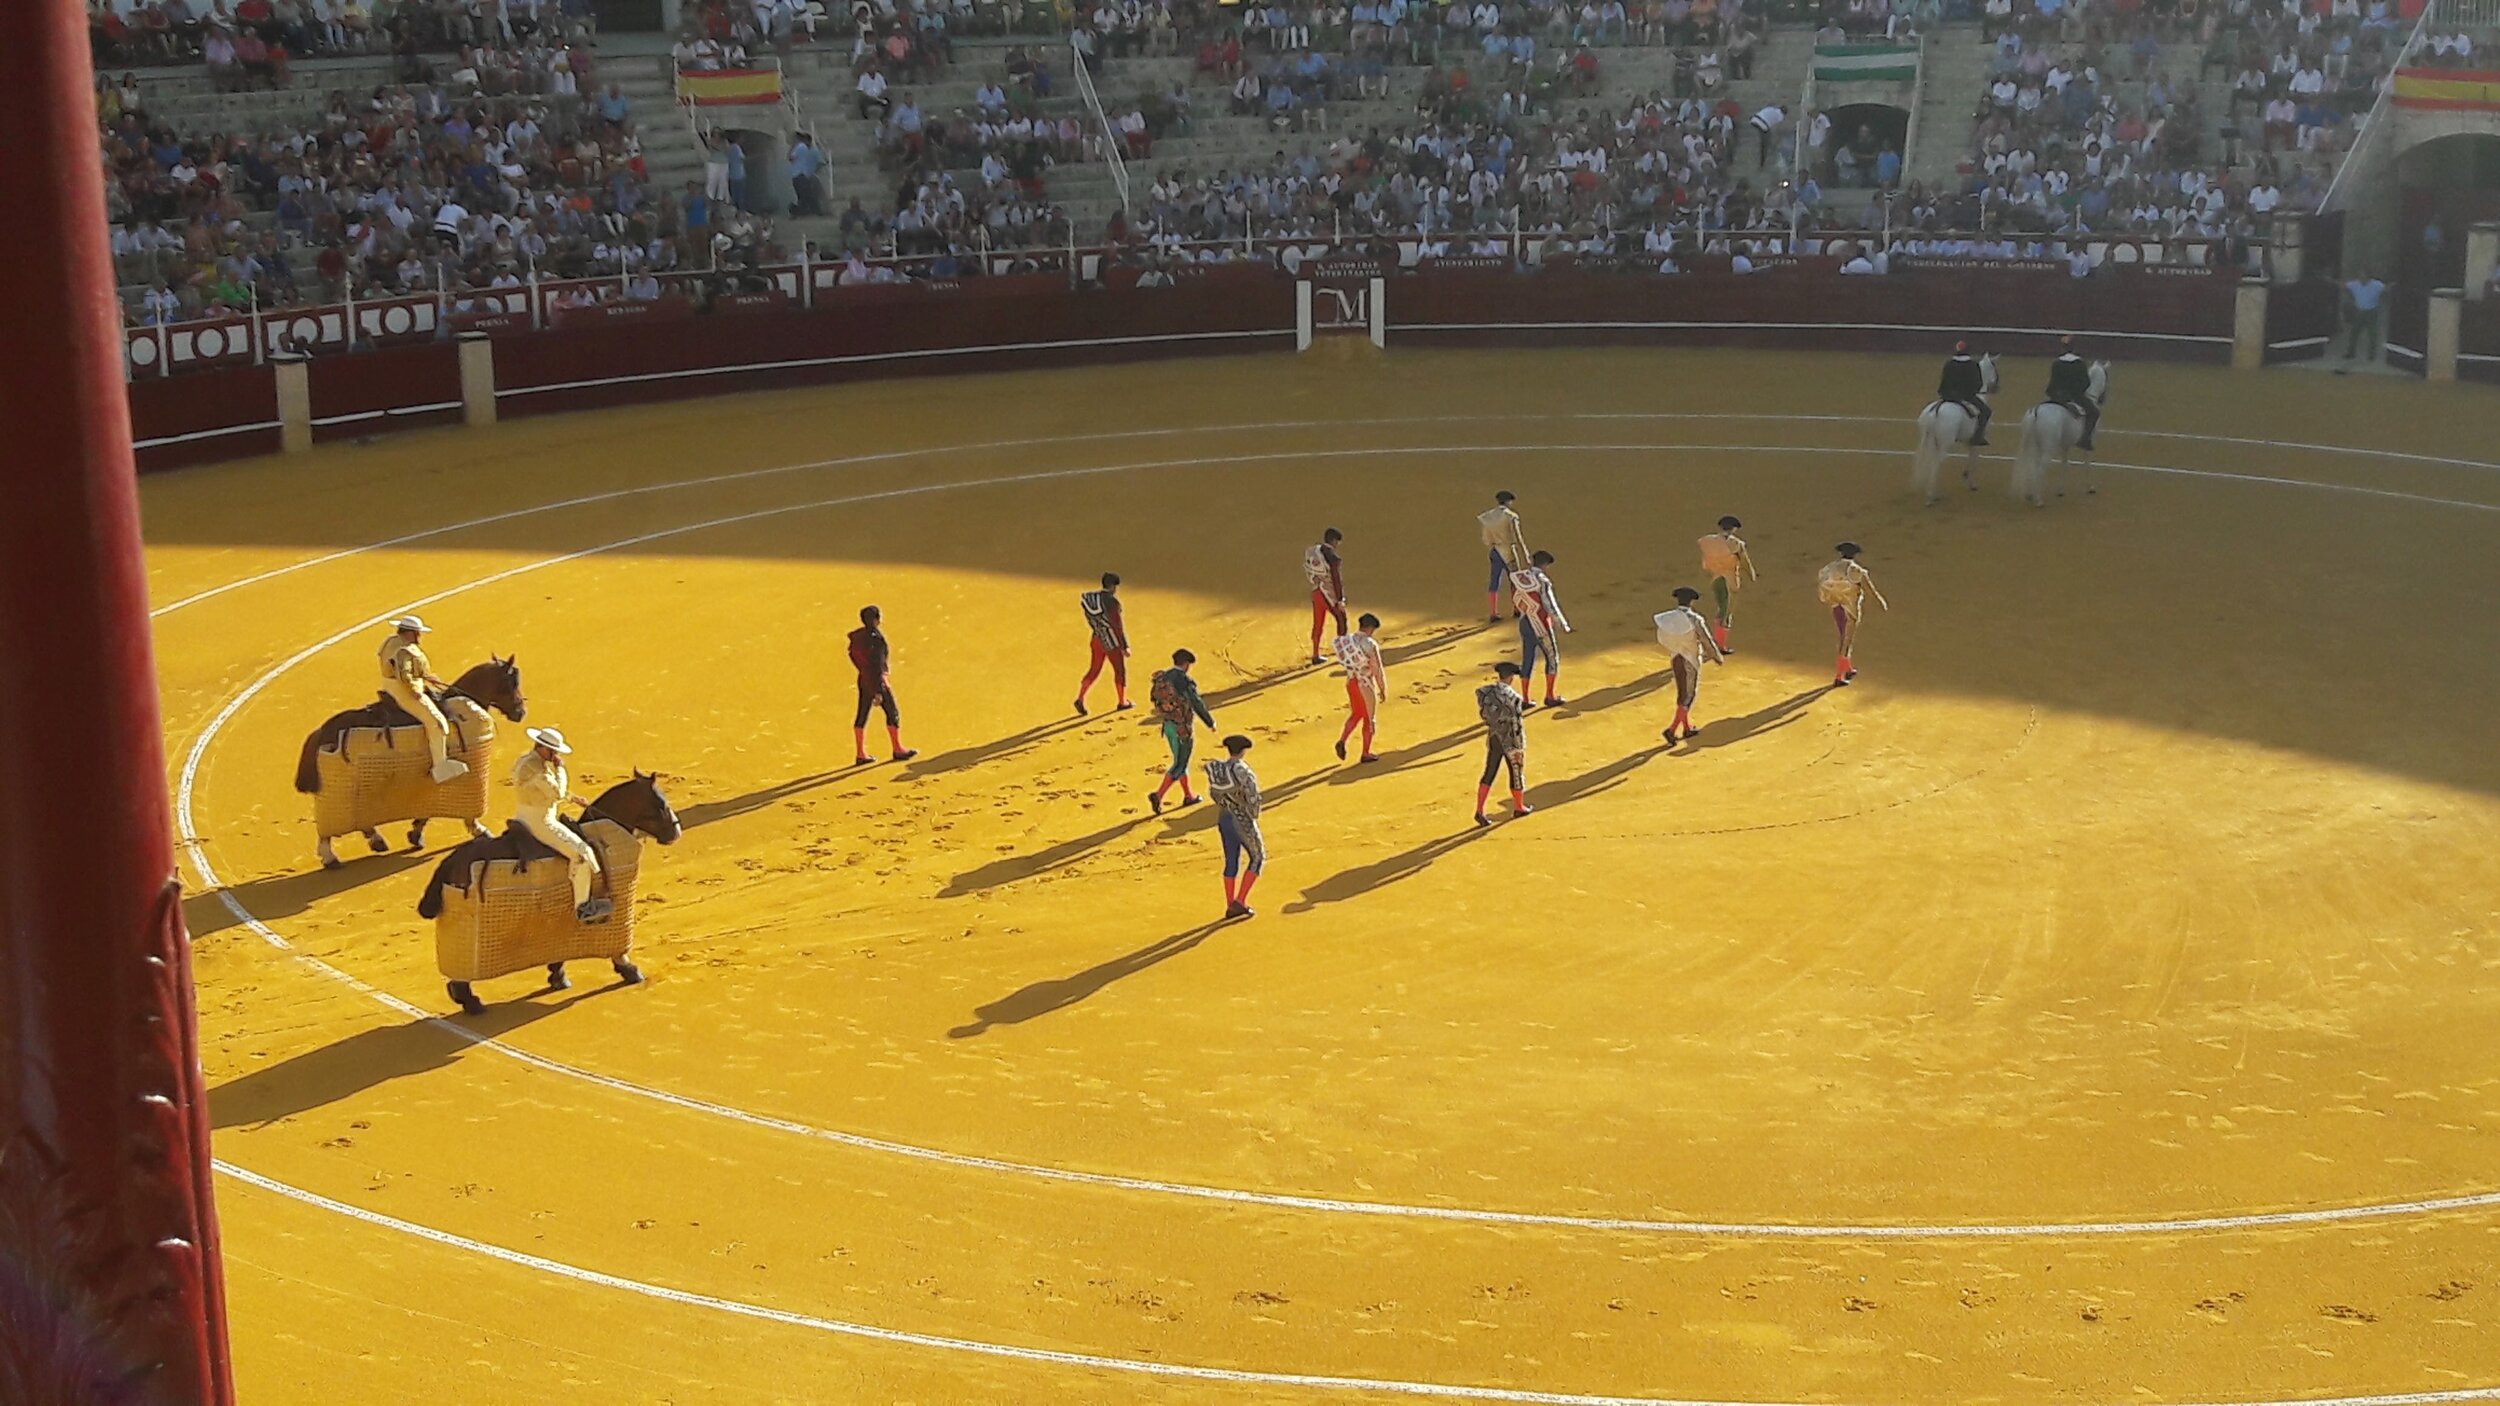 While bullfighting is important to some Spaniards, others are very much against it.